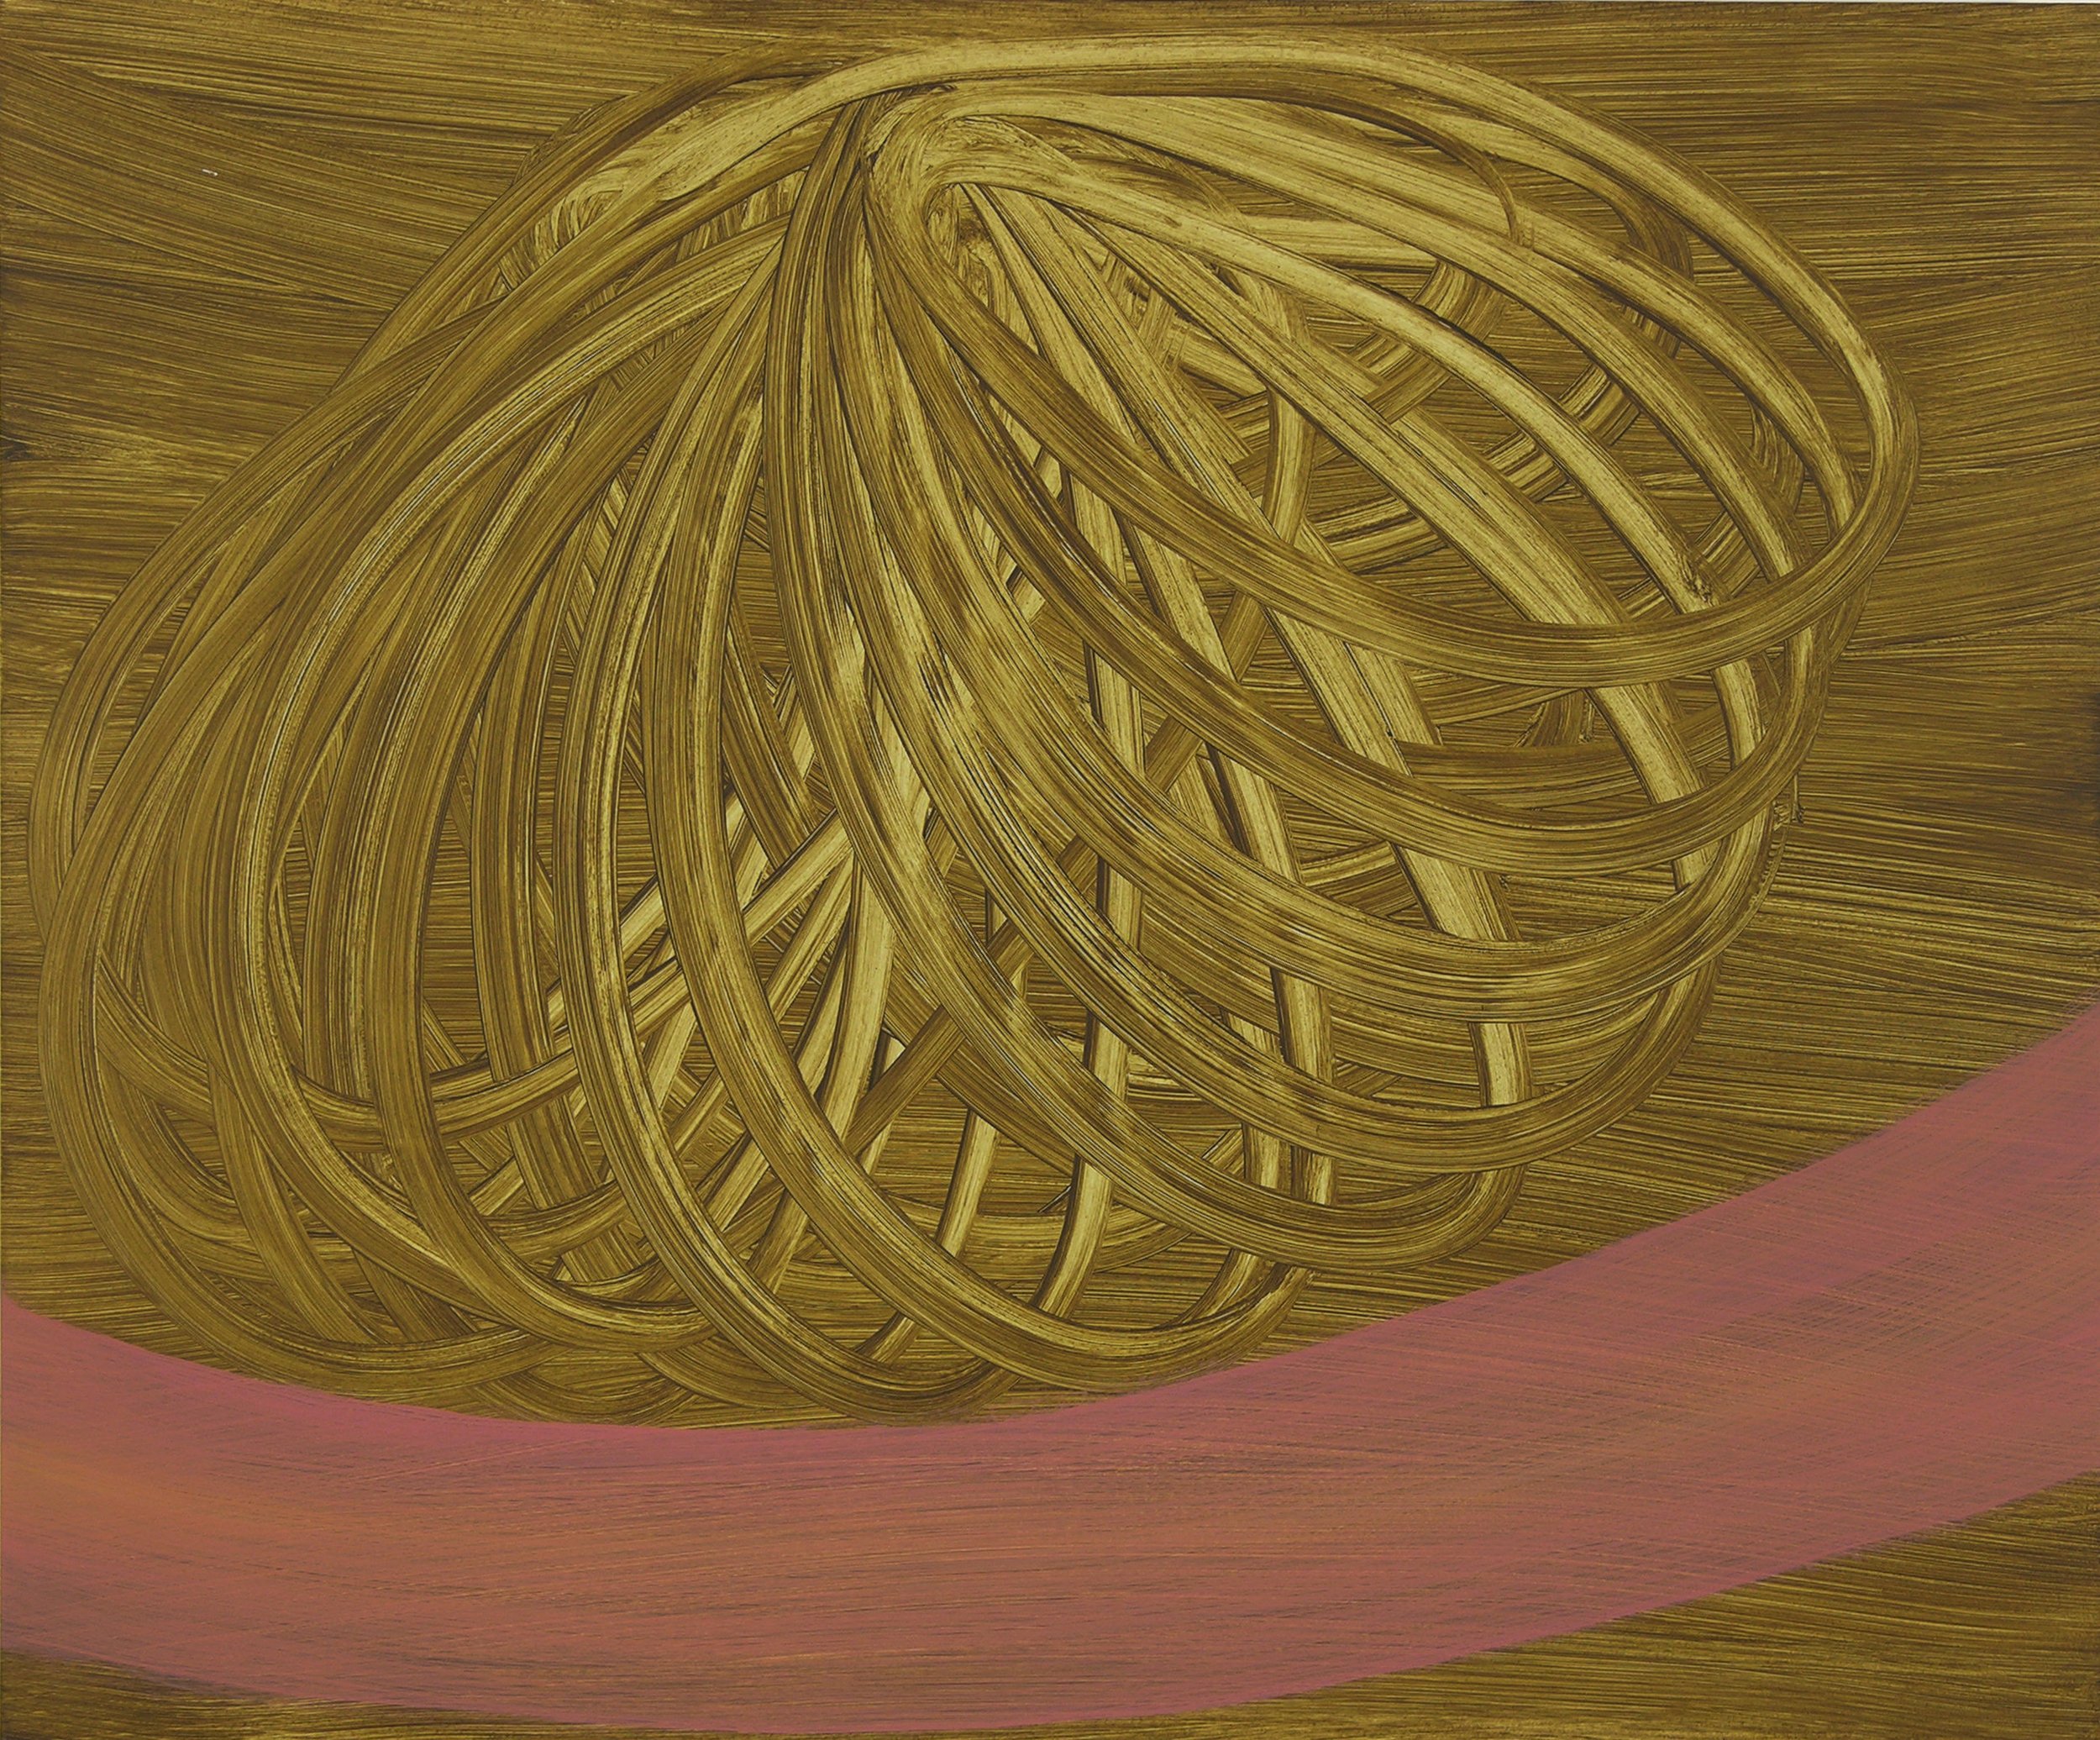  Basket, 2013  oil on panel, 40 x 48 inches (101.6 x 121.92 cm)  